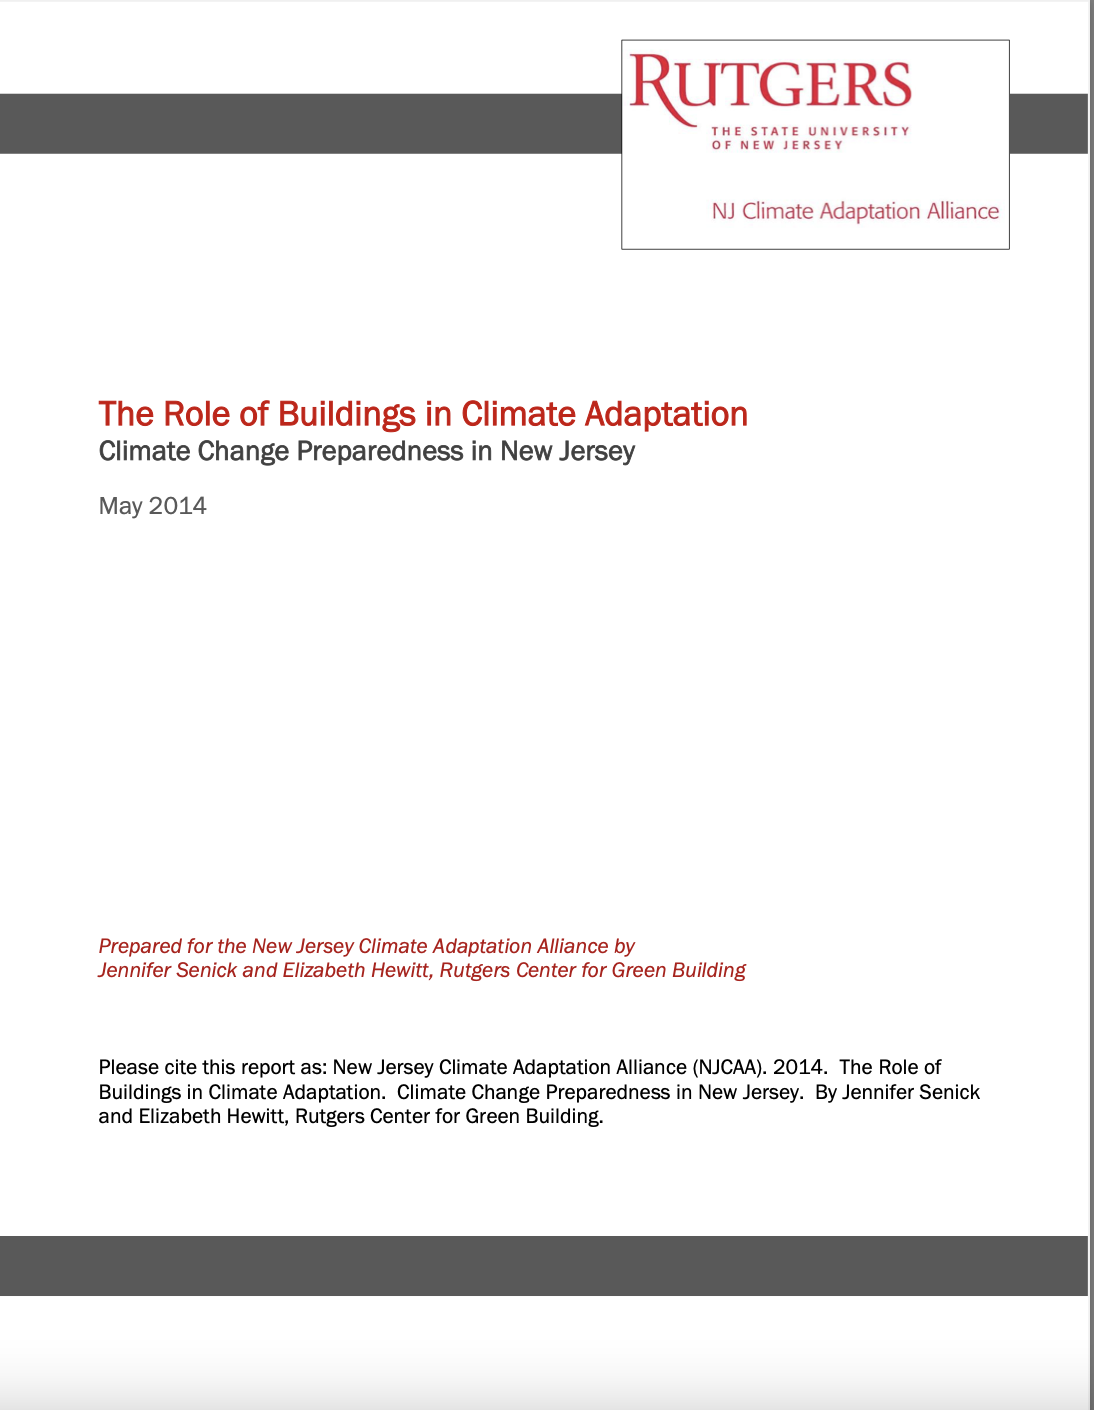 The Role of Buildings in Climate Adaptation